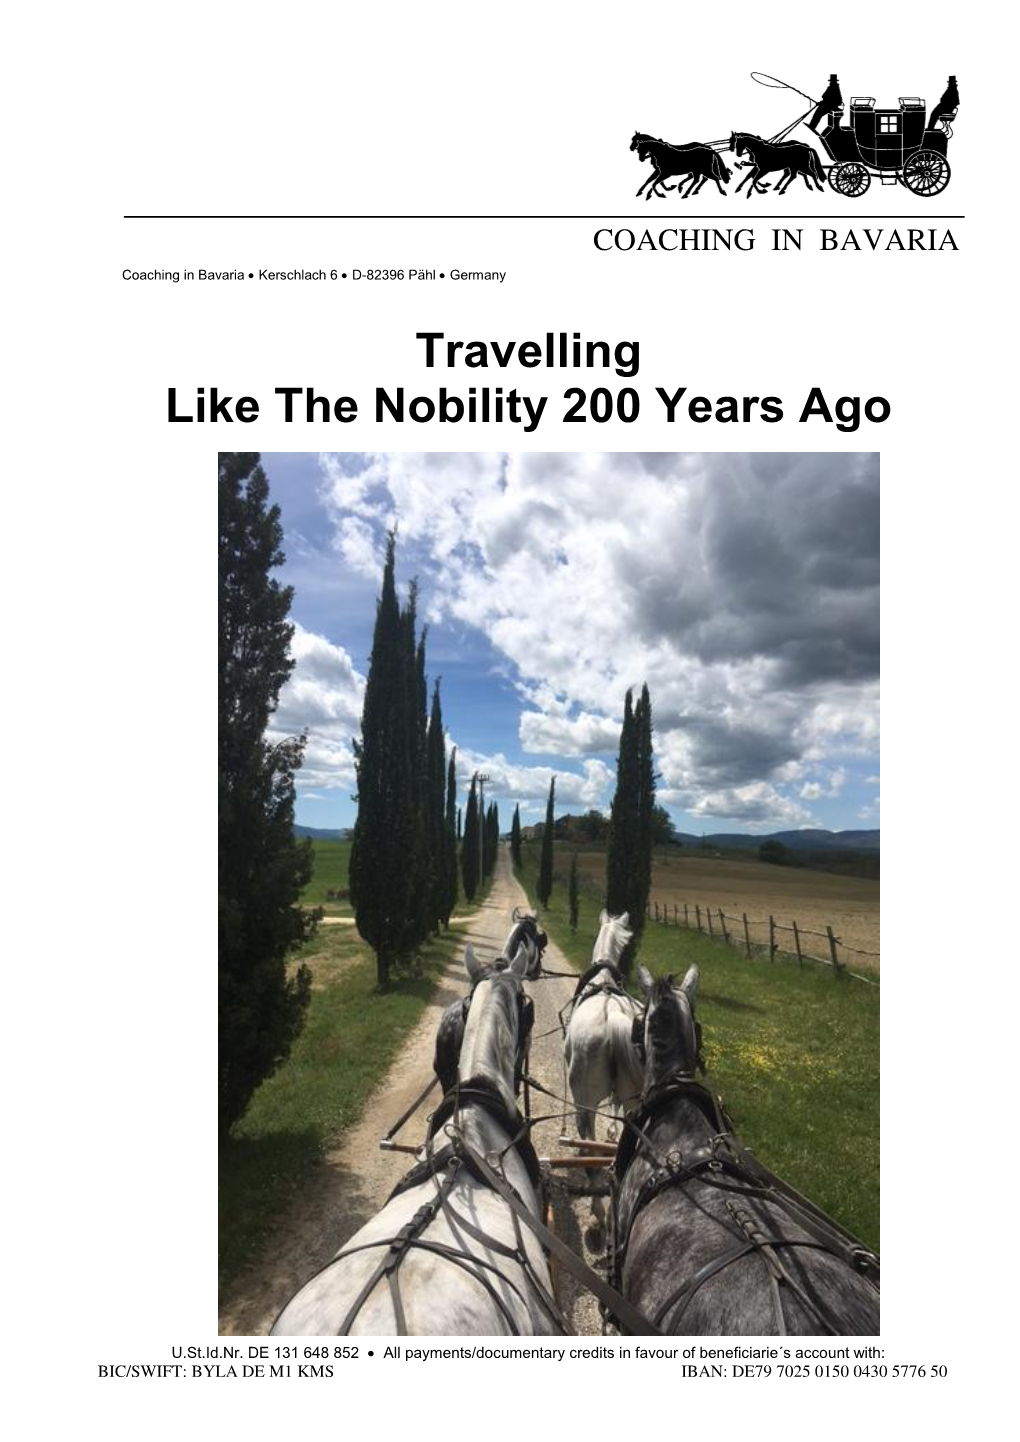 Travelling Like the Nobility 200 Years Ago